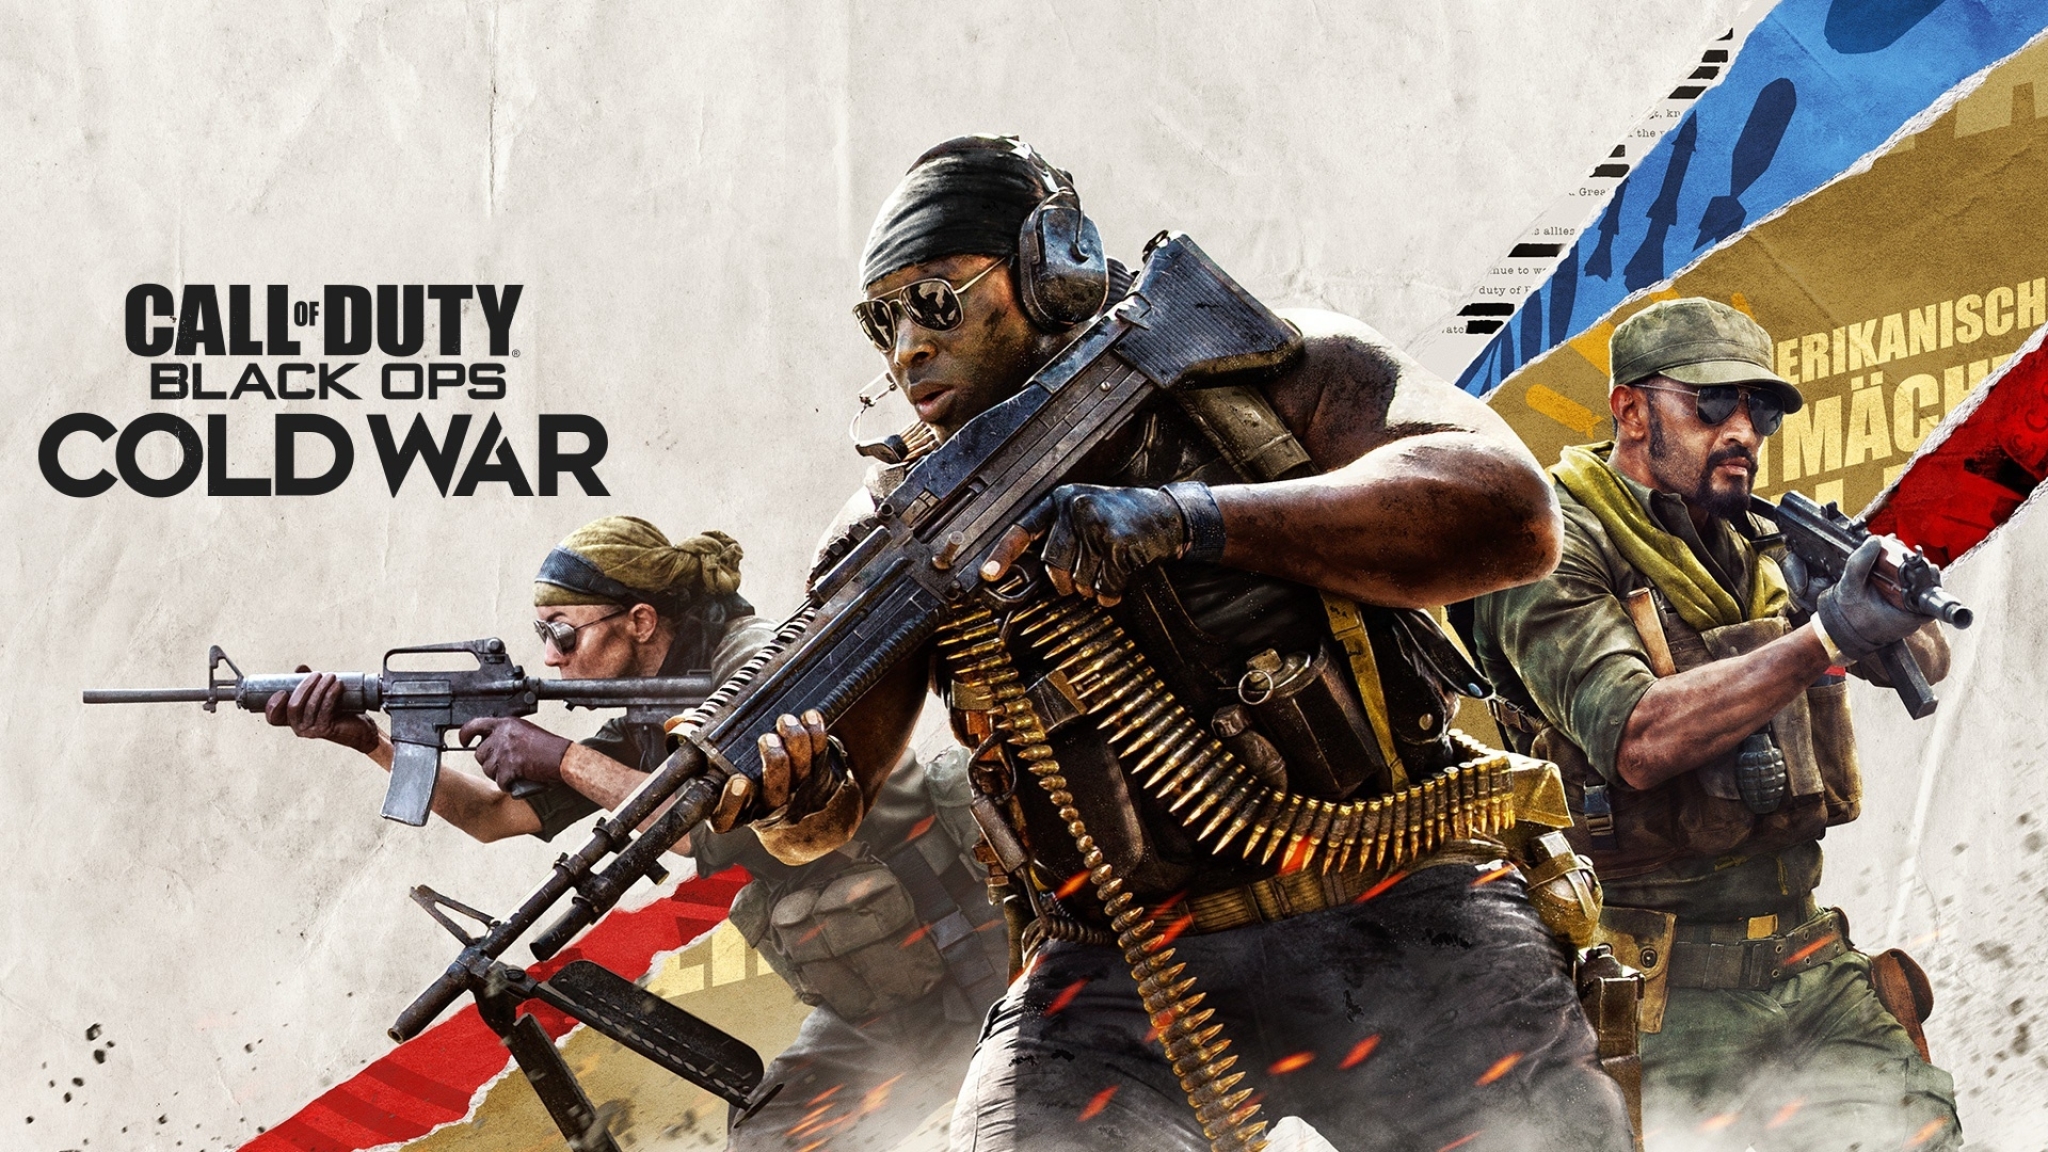 call of duty: black ops cold war price in india